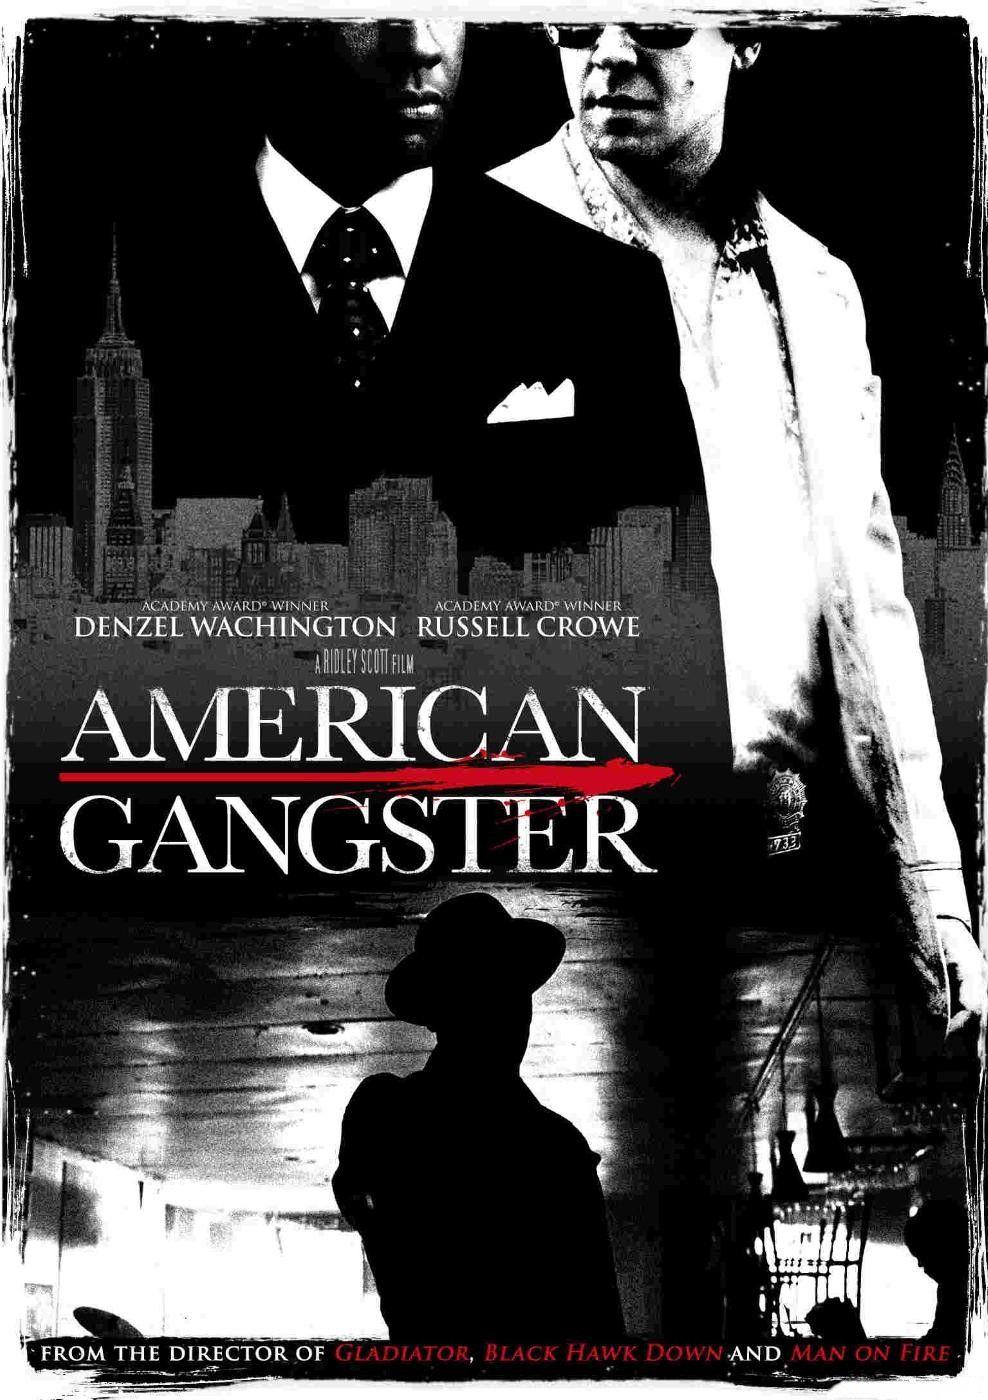 Gallery For > American Gangster Wallpaper